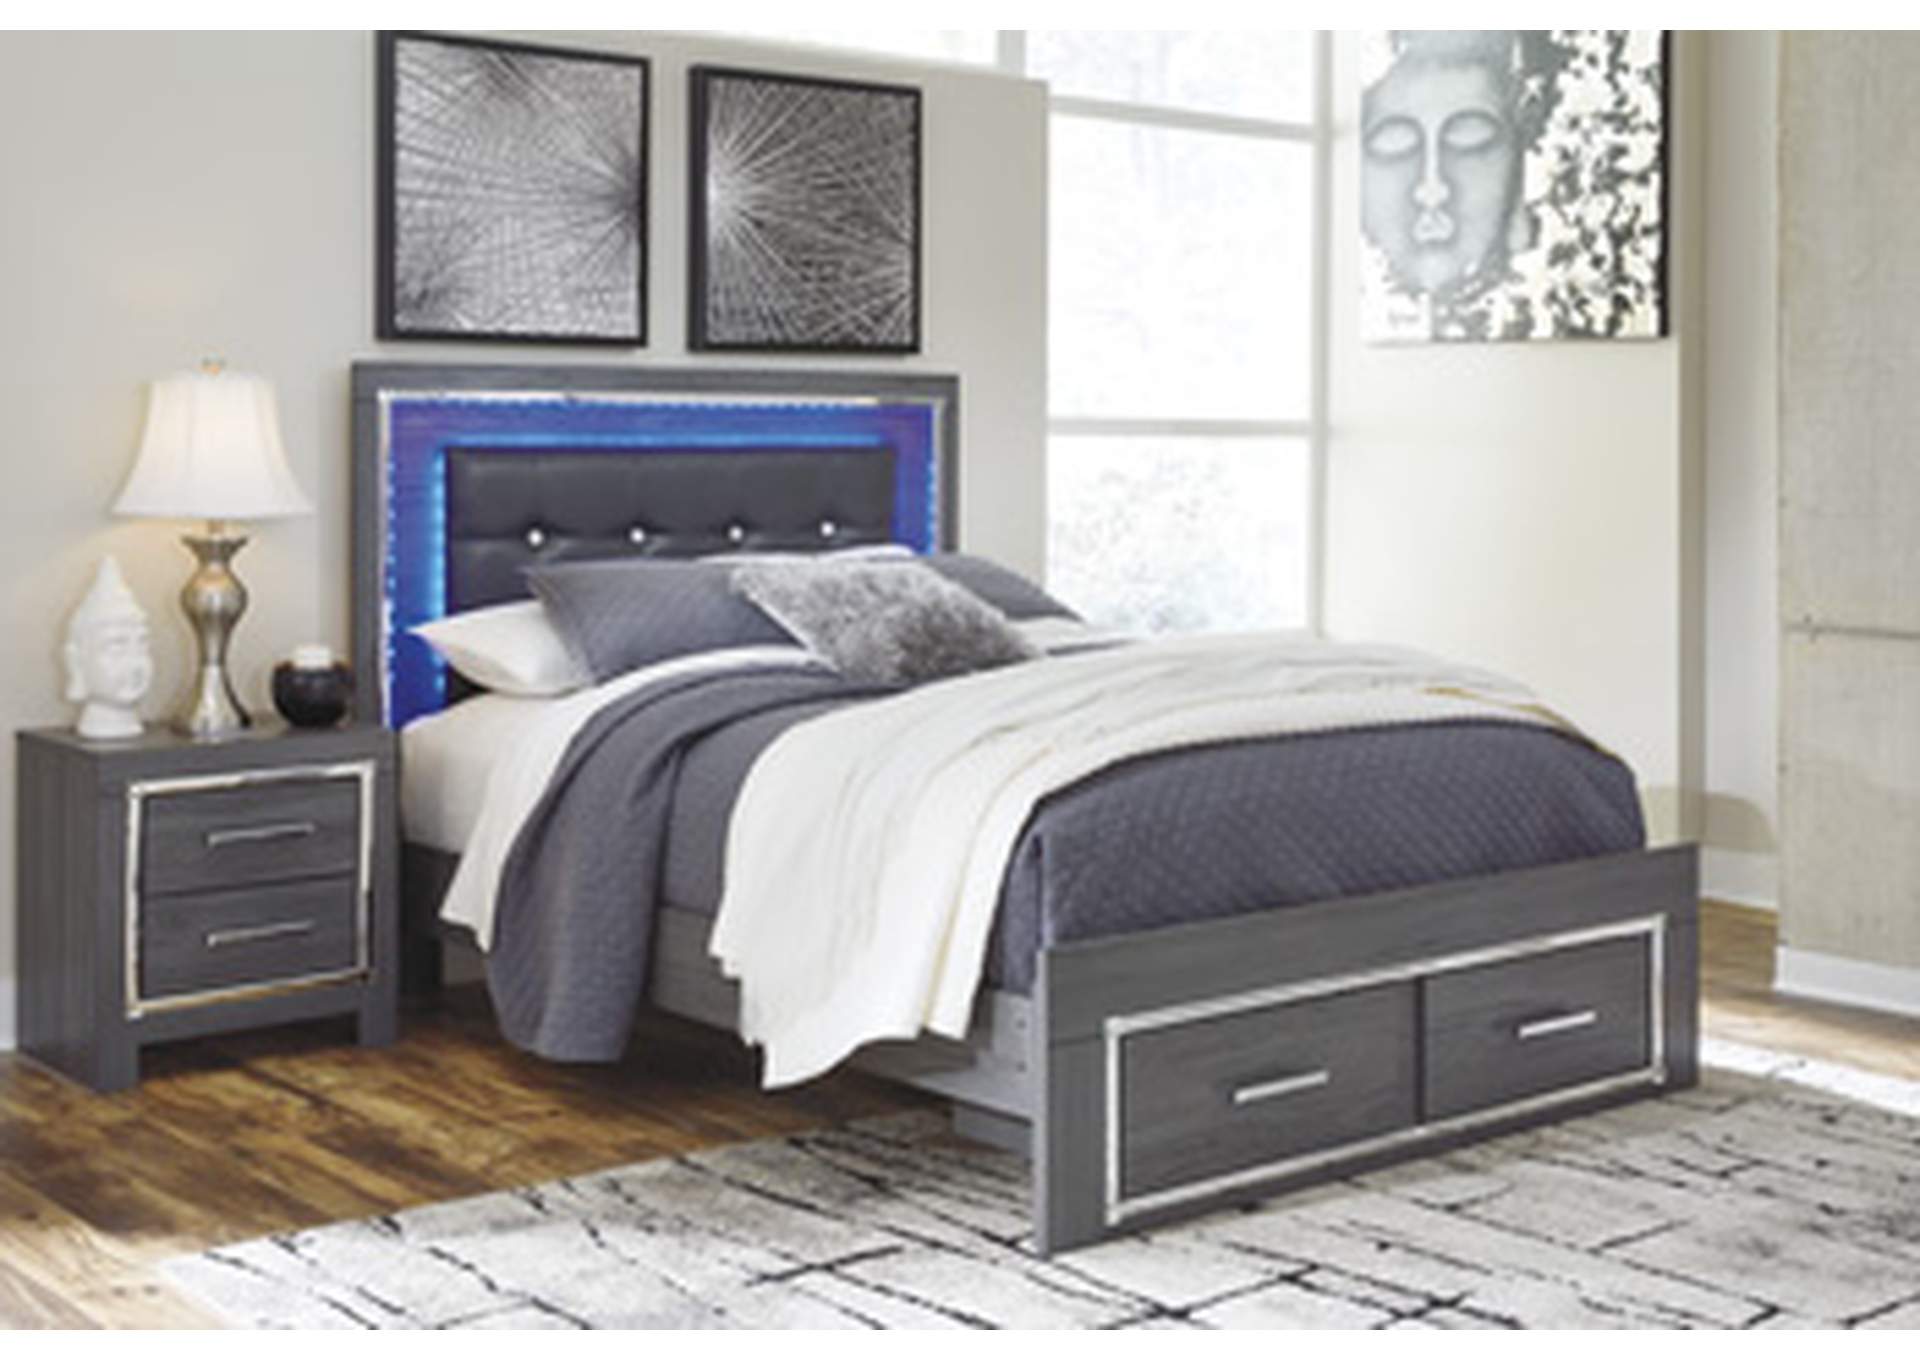 Lodanna King Upholstered Storage Bed, Dresser, Mirror, and Nightstand,Signature Design By Ashley